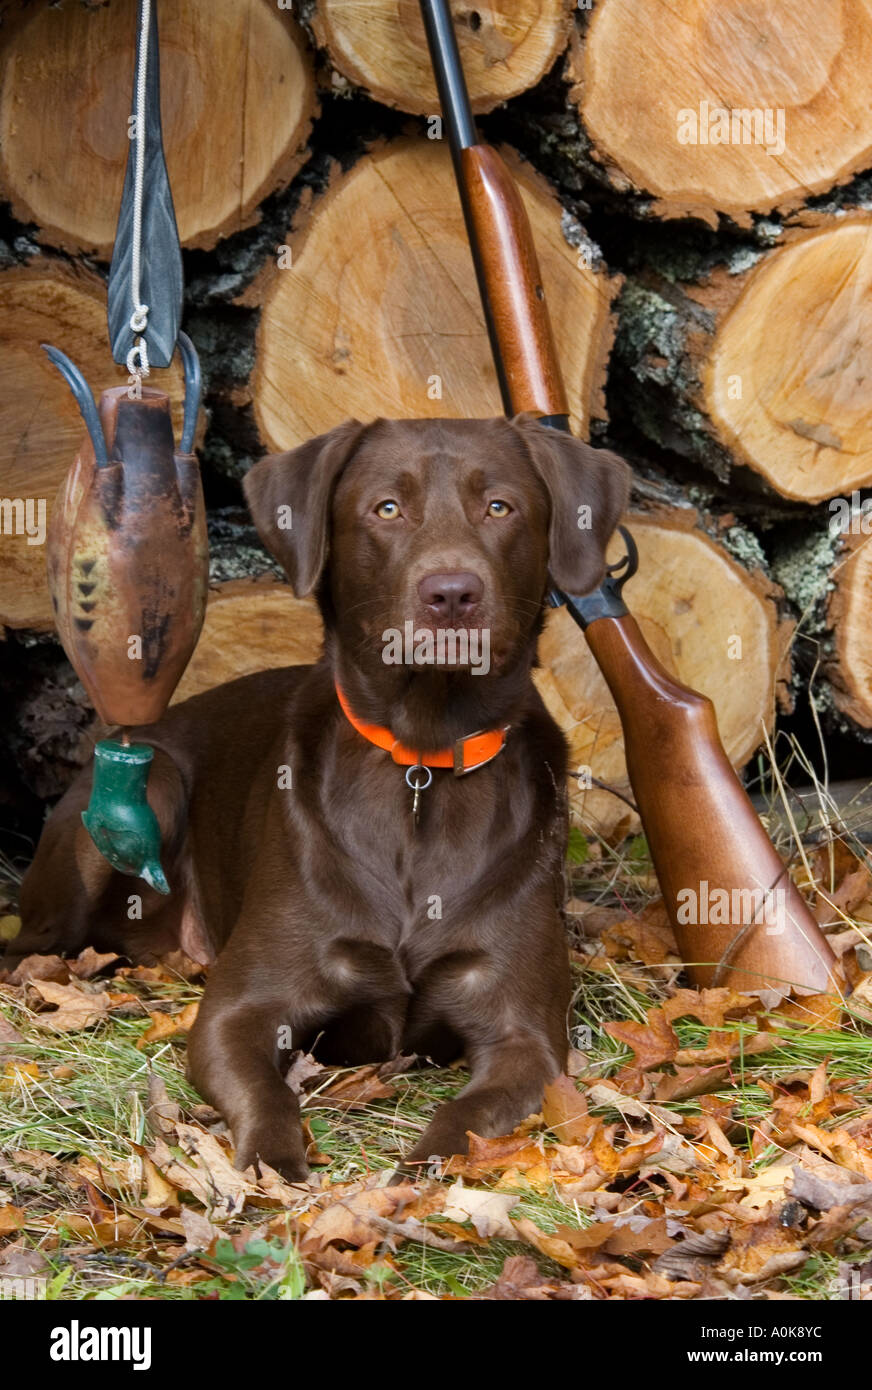 Chocolate Labrador Lying Beside Shotgun and Retrieving Toy in Front of Stack of Firewood Wisconsin Stock Photo